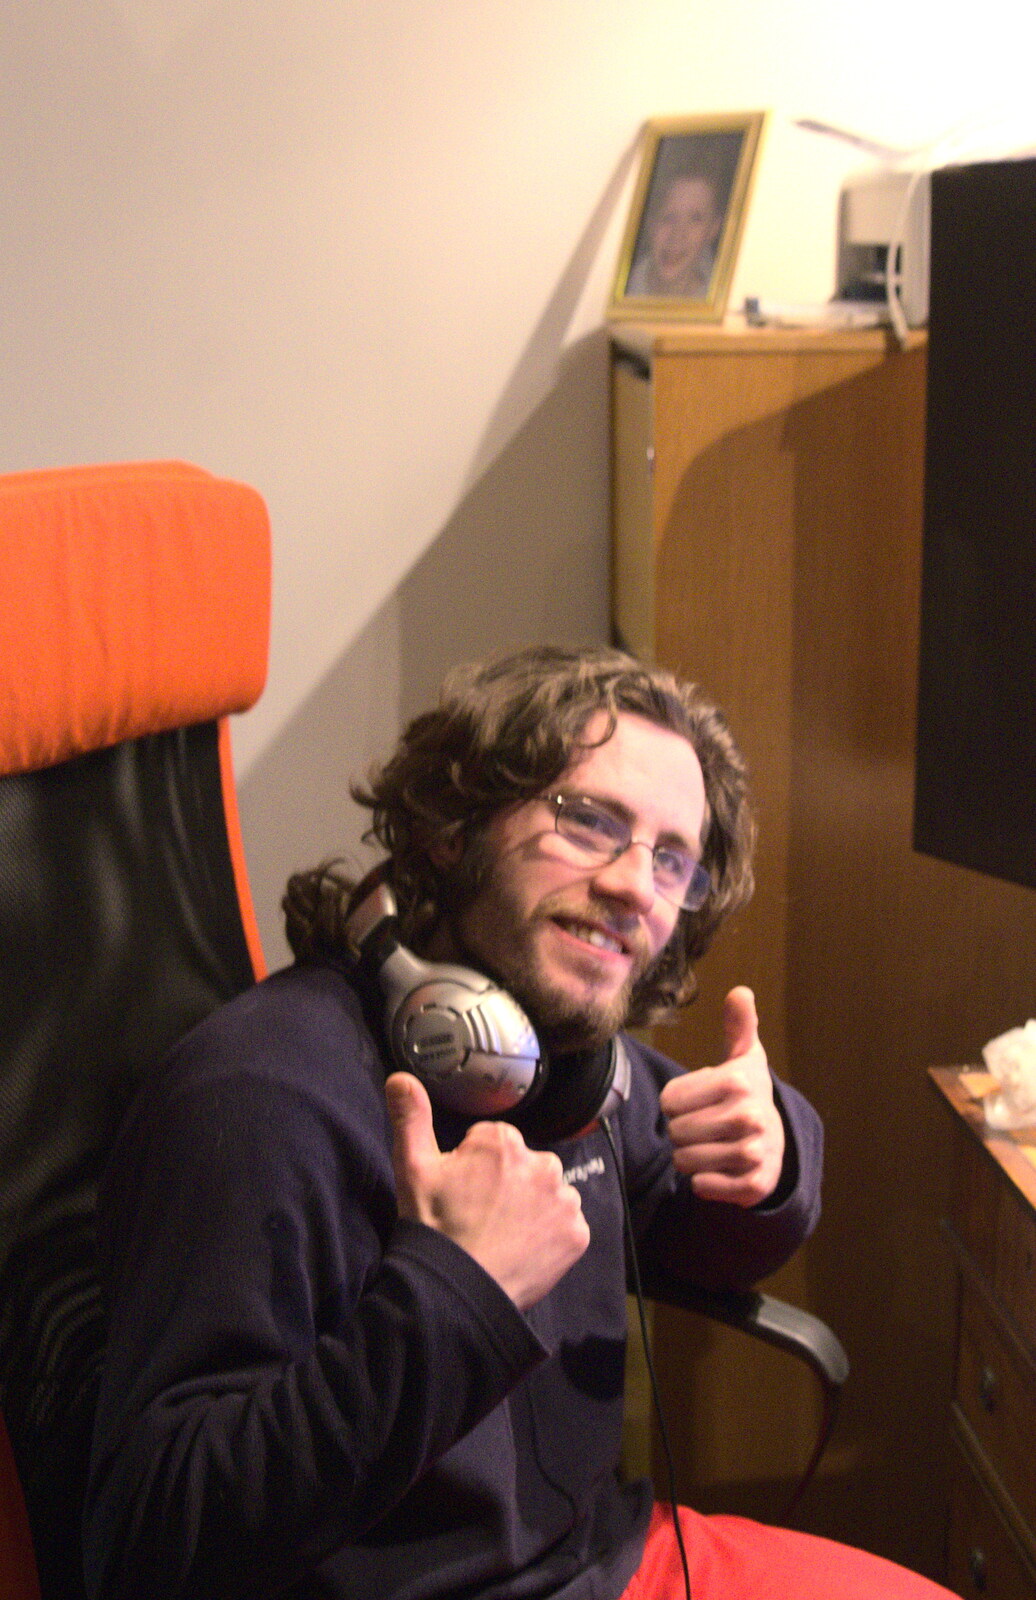 Henry gives it a thumbs up from The BBs do a Recording, Hethel, Norfolk - 18th January 2015